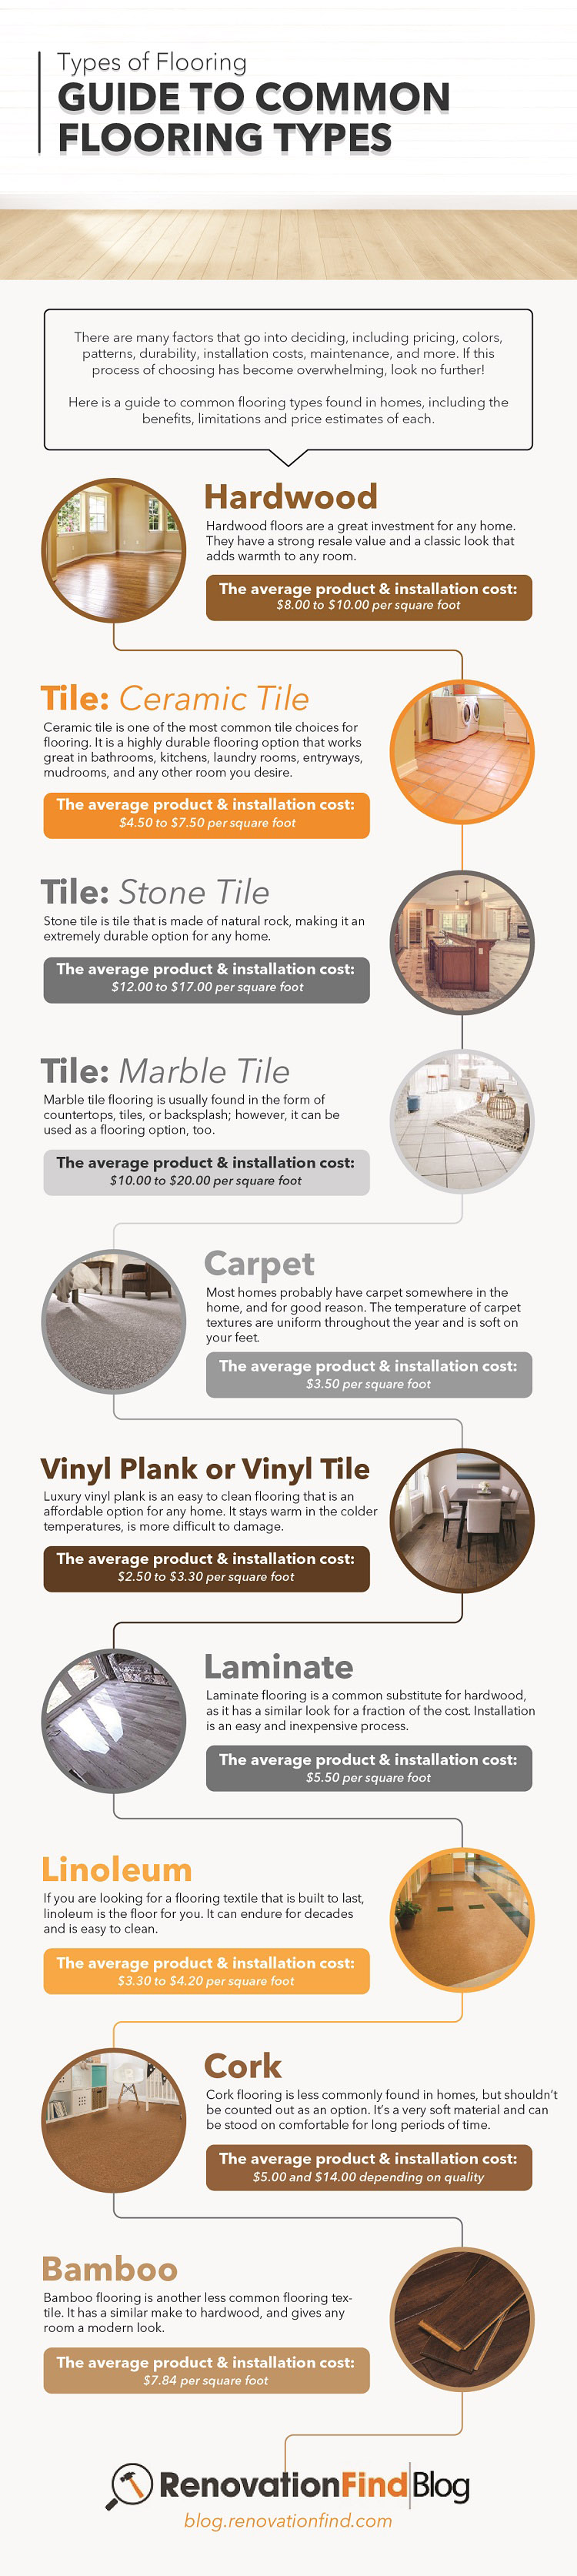 Guide To Common Flooring Types